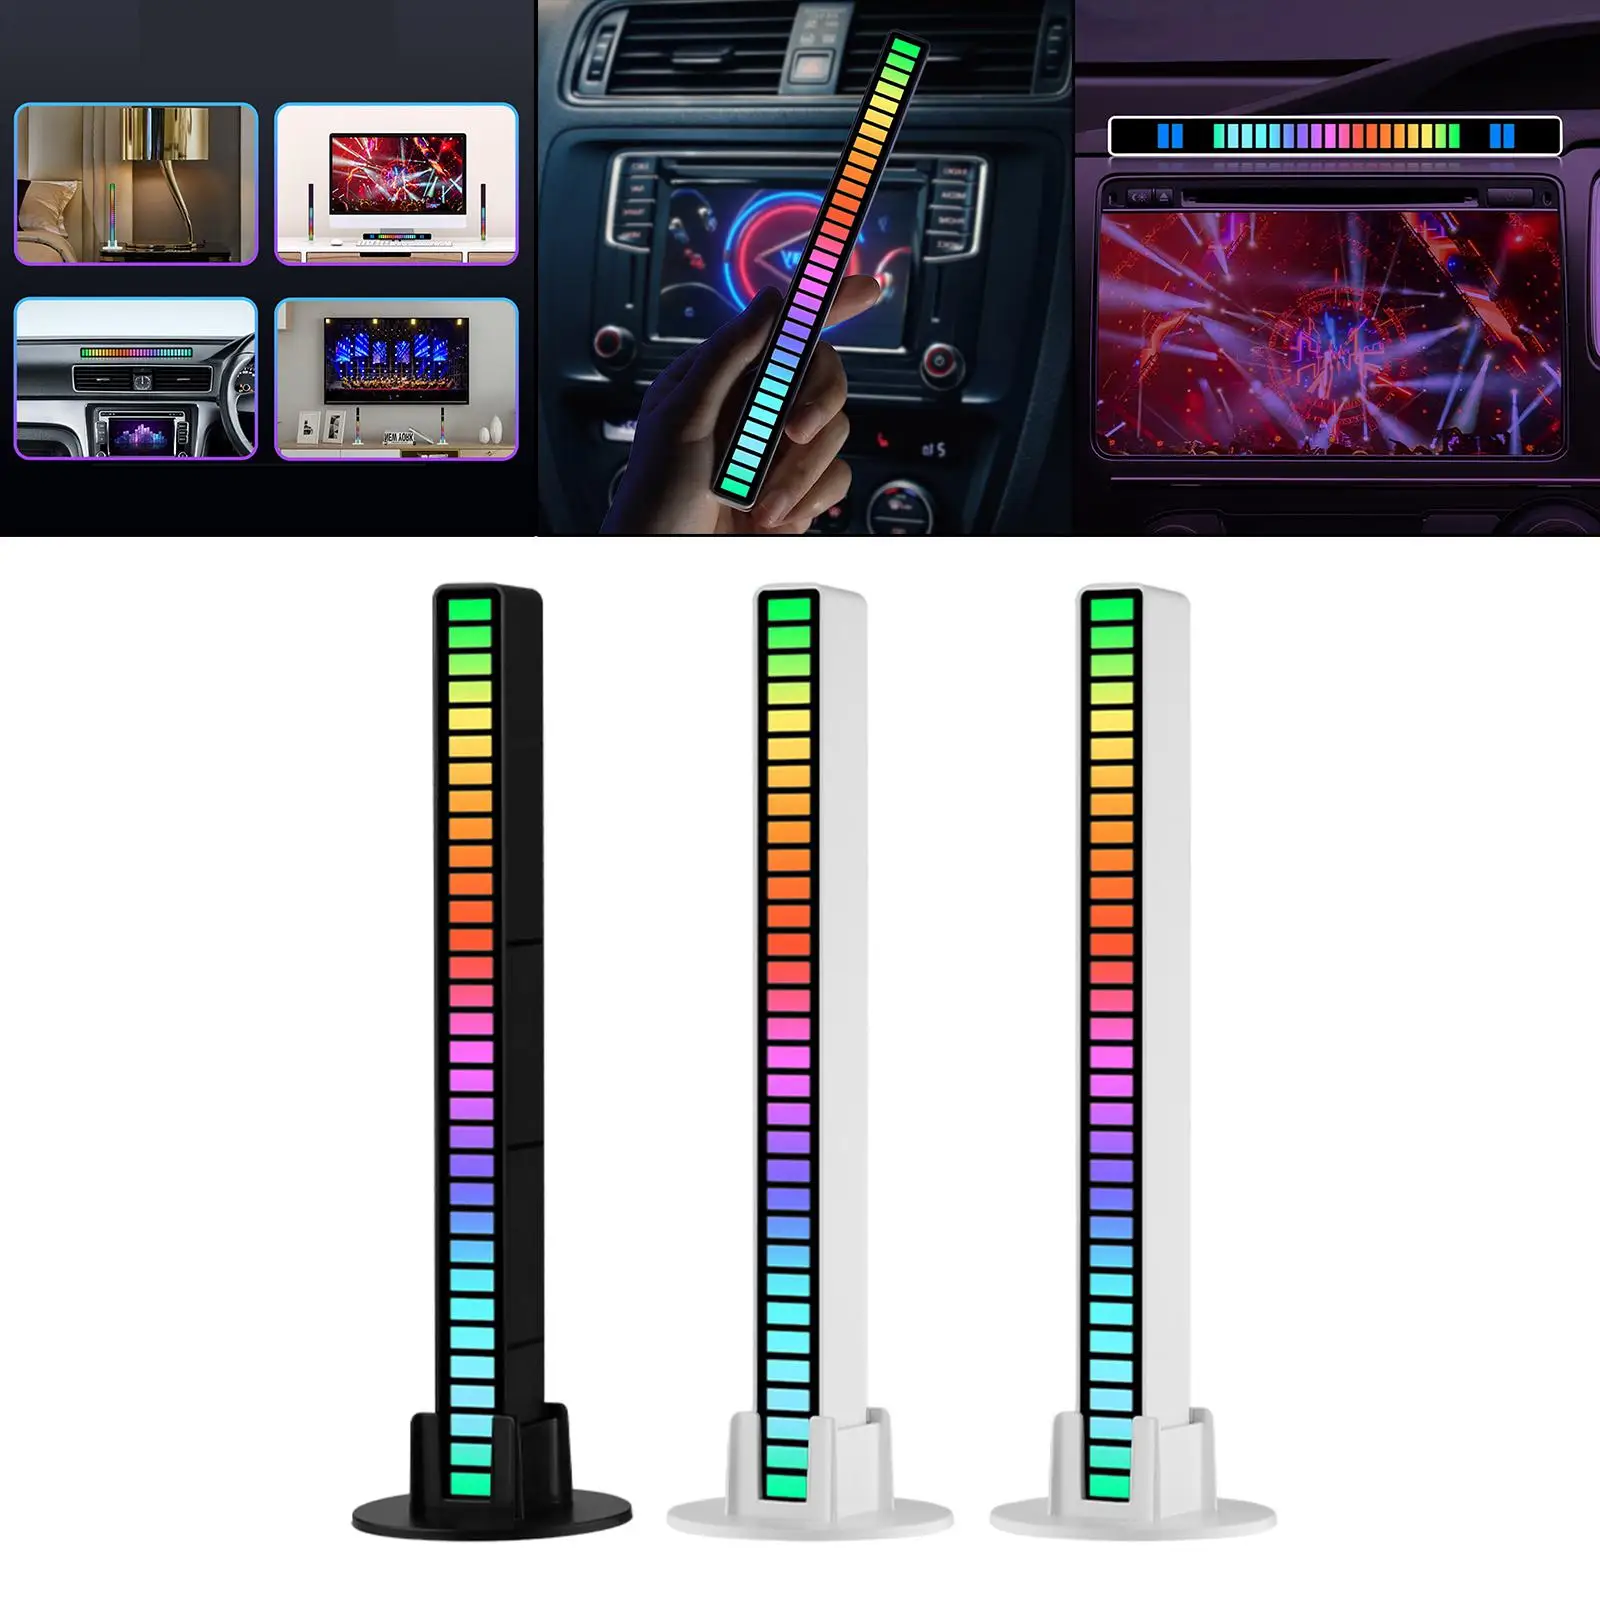 RGB Sound Reactive LED Light Bar, 32 LED Music Level Indicator, Creative Colorful Ambient Light, Voice-Activated Pickup 